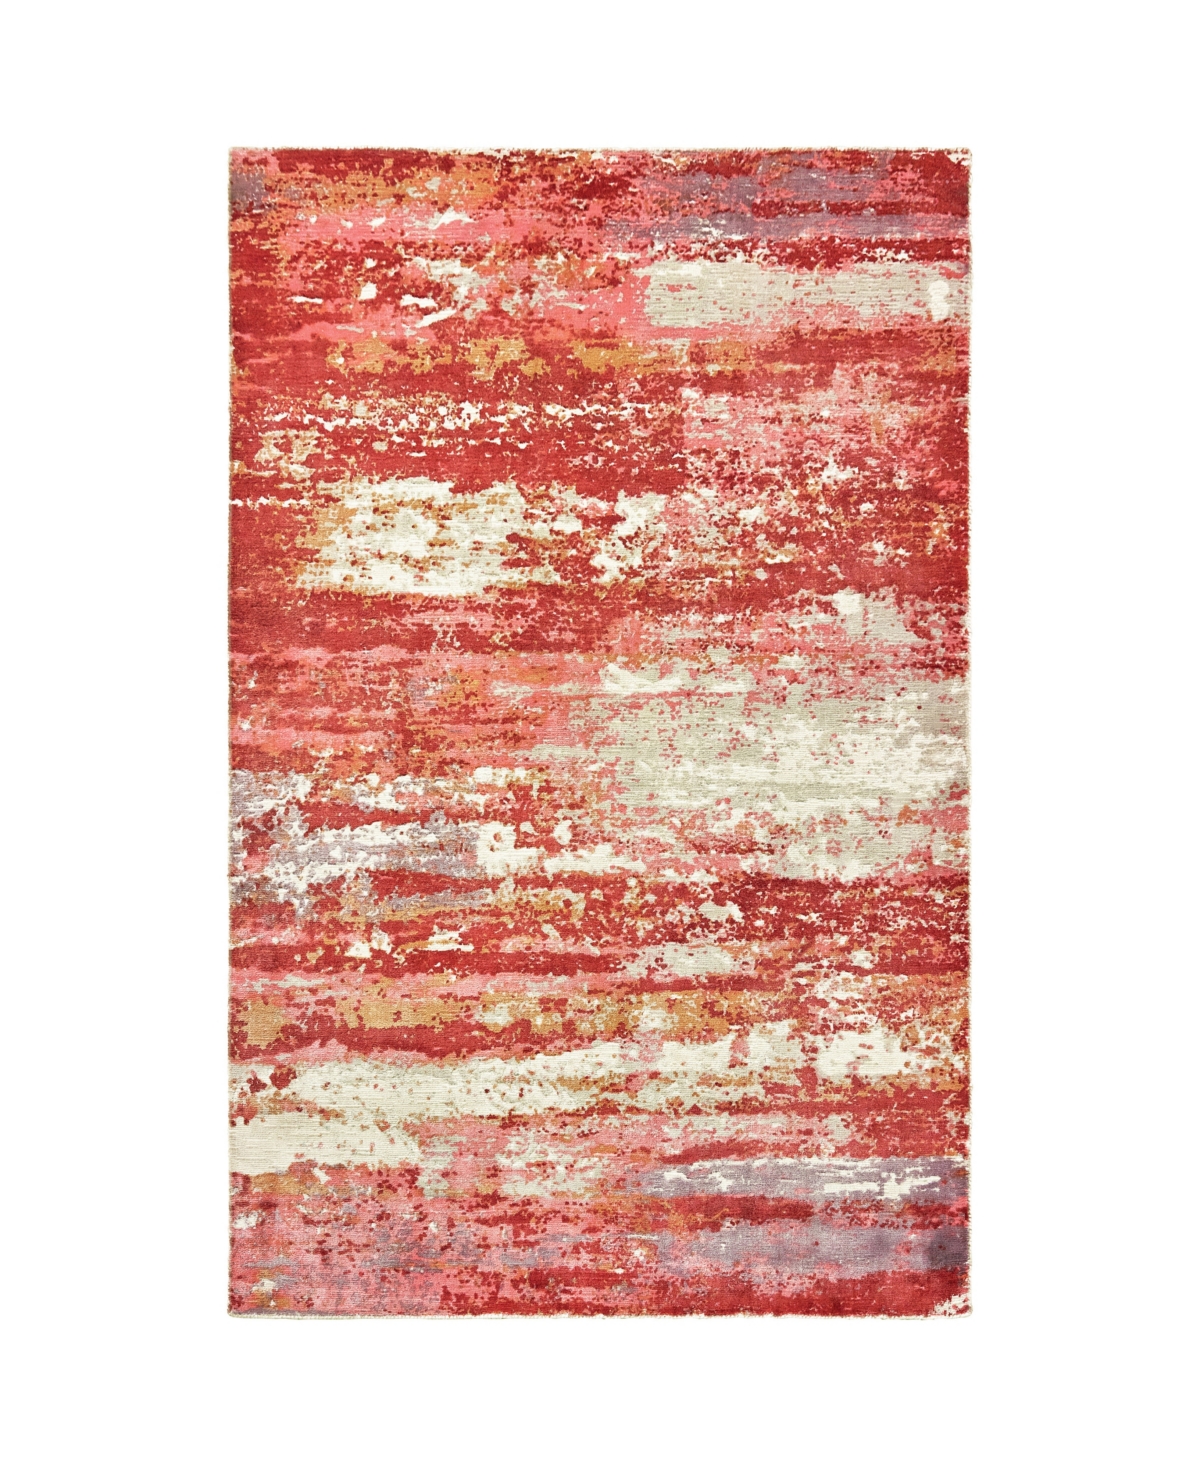 Jhb Design Creation CRE04 Pink 9' x 12' Area Rug - Red